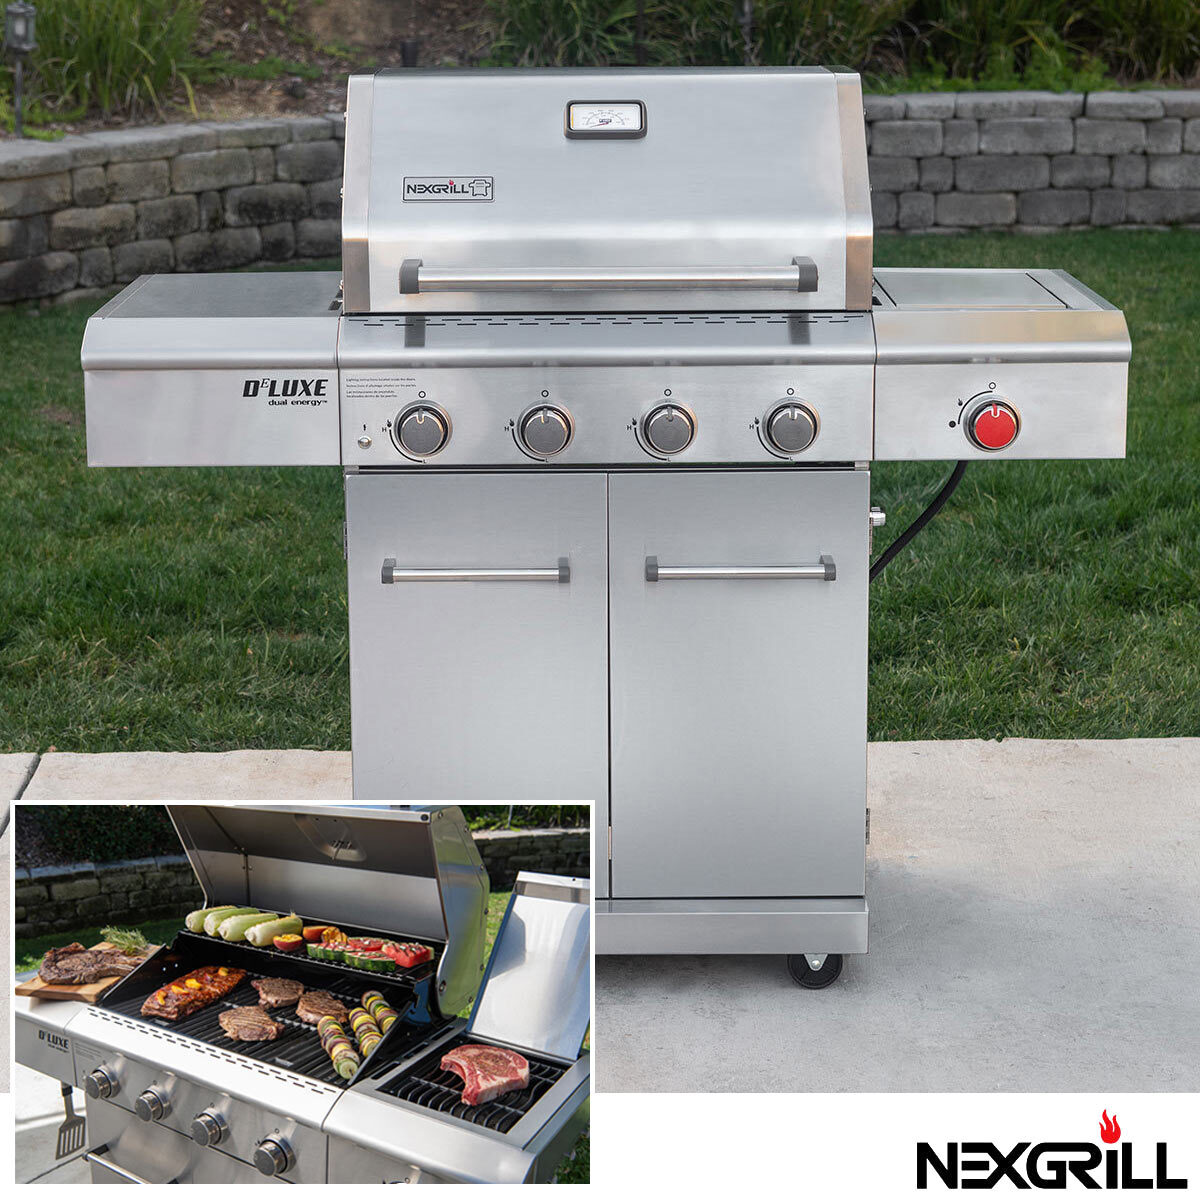 Nexgrill Deluxe Burner Stainless Steel Gas Barbecue S...